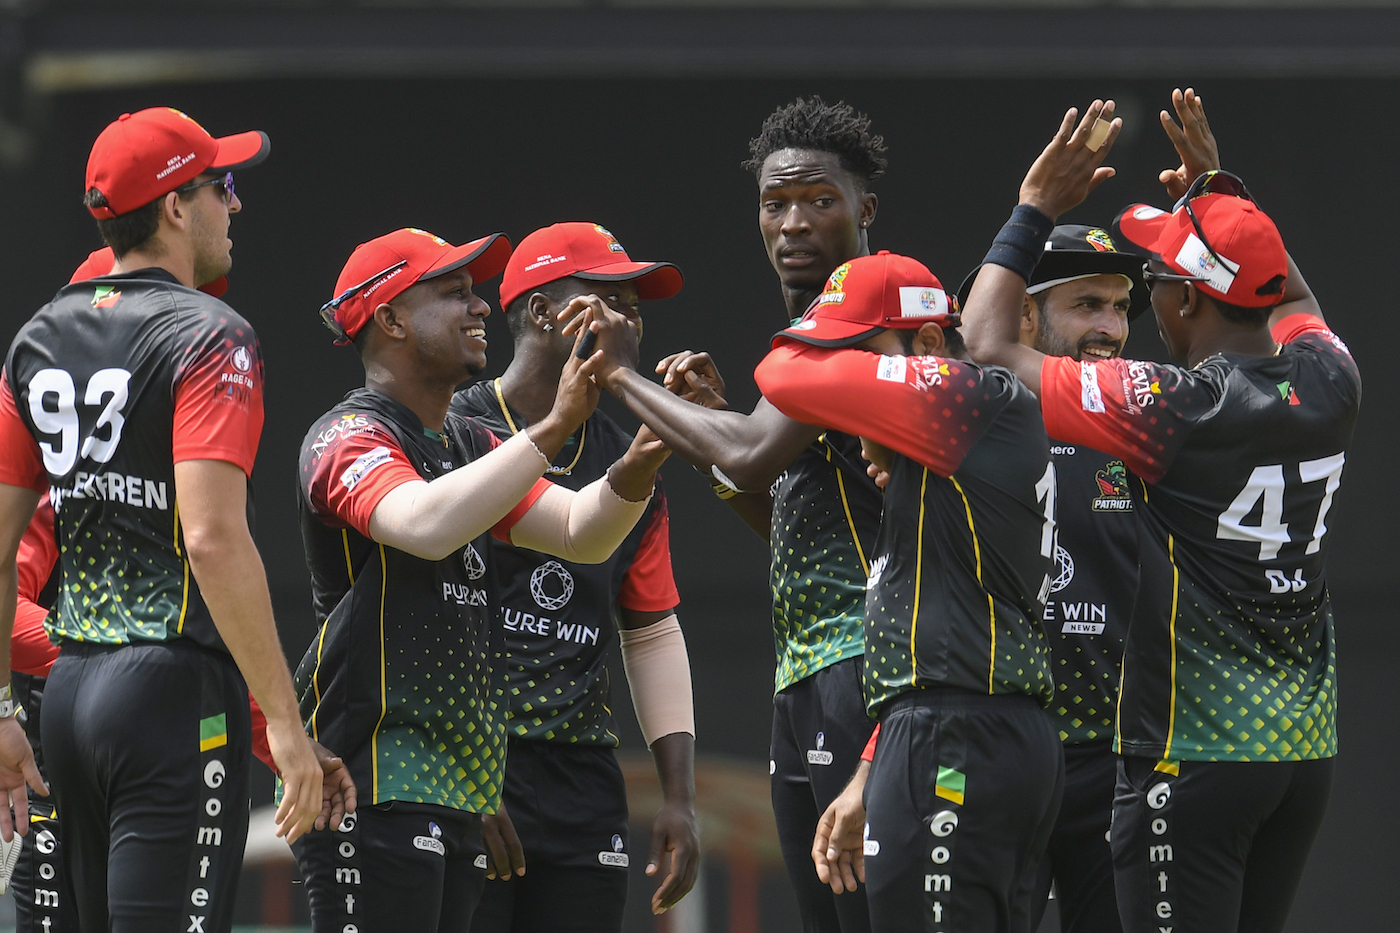 Jamaica Tallawahs and St Kitts and Nevis Patriots Round up match updates in Caribbean Premier League: CPL 21